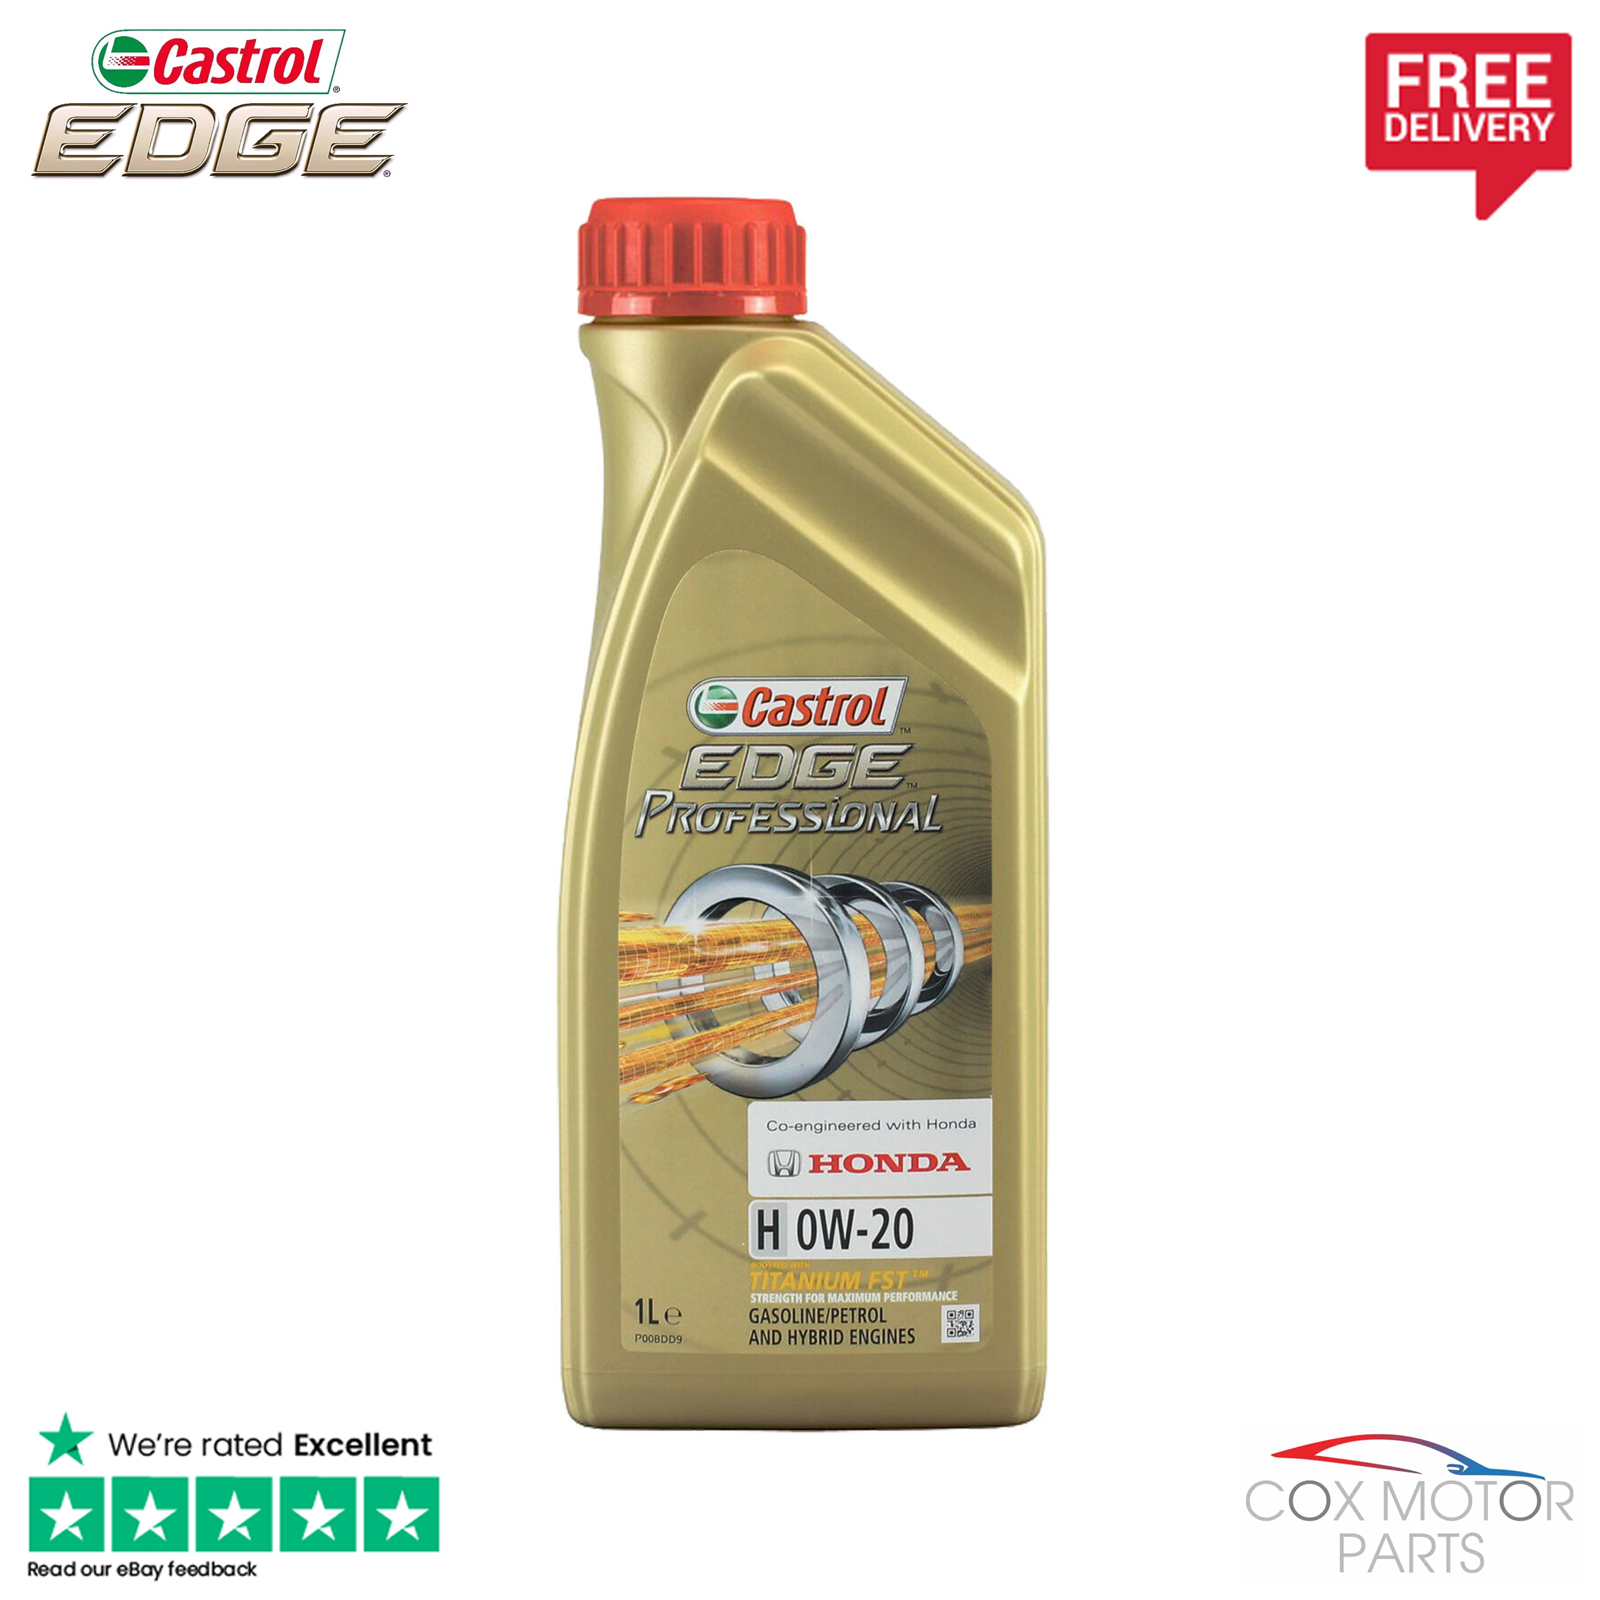 Castrol Edge Professional H 0W20 Fully Synthetic Engine Oil 1 Litre  eBay